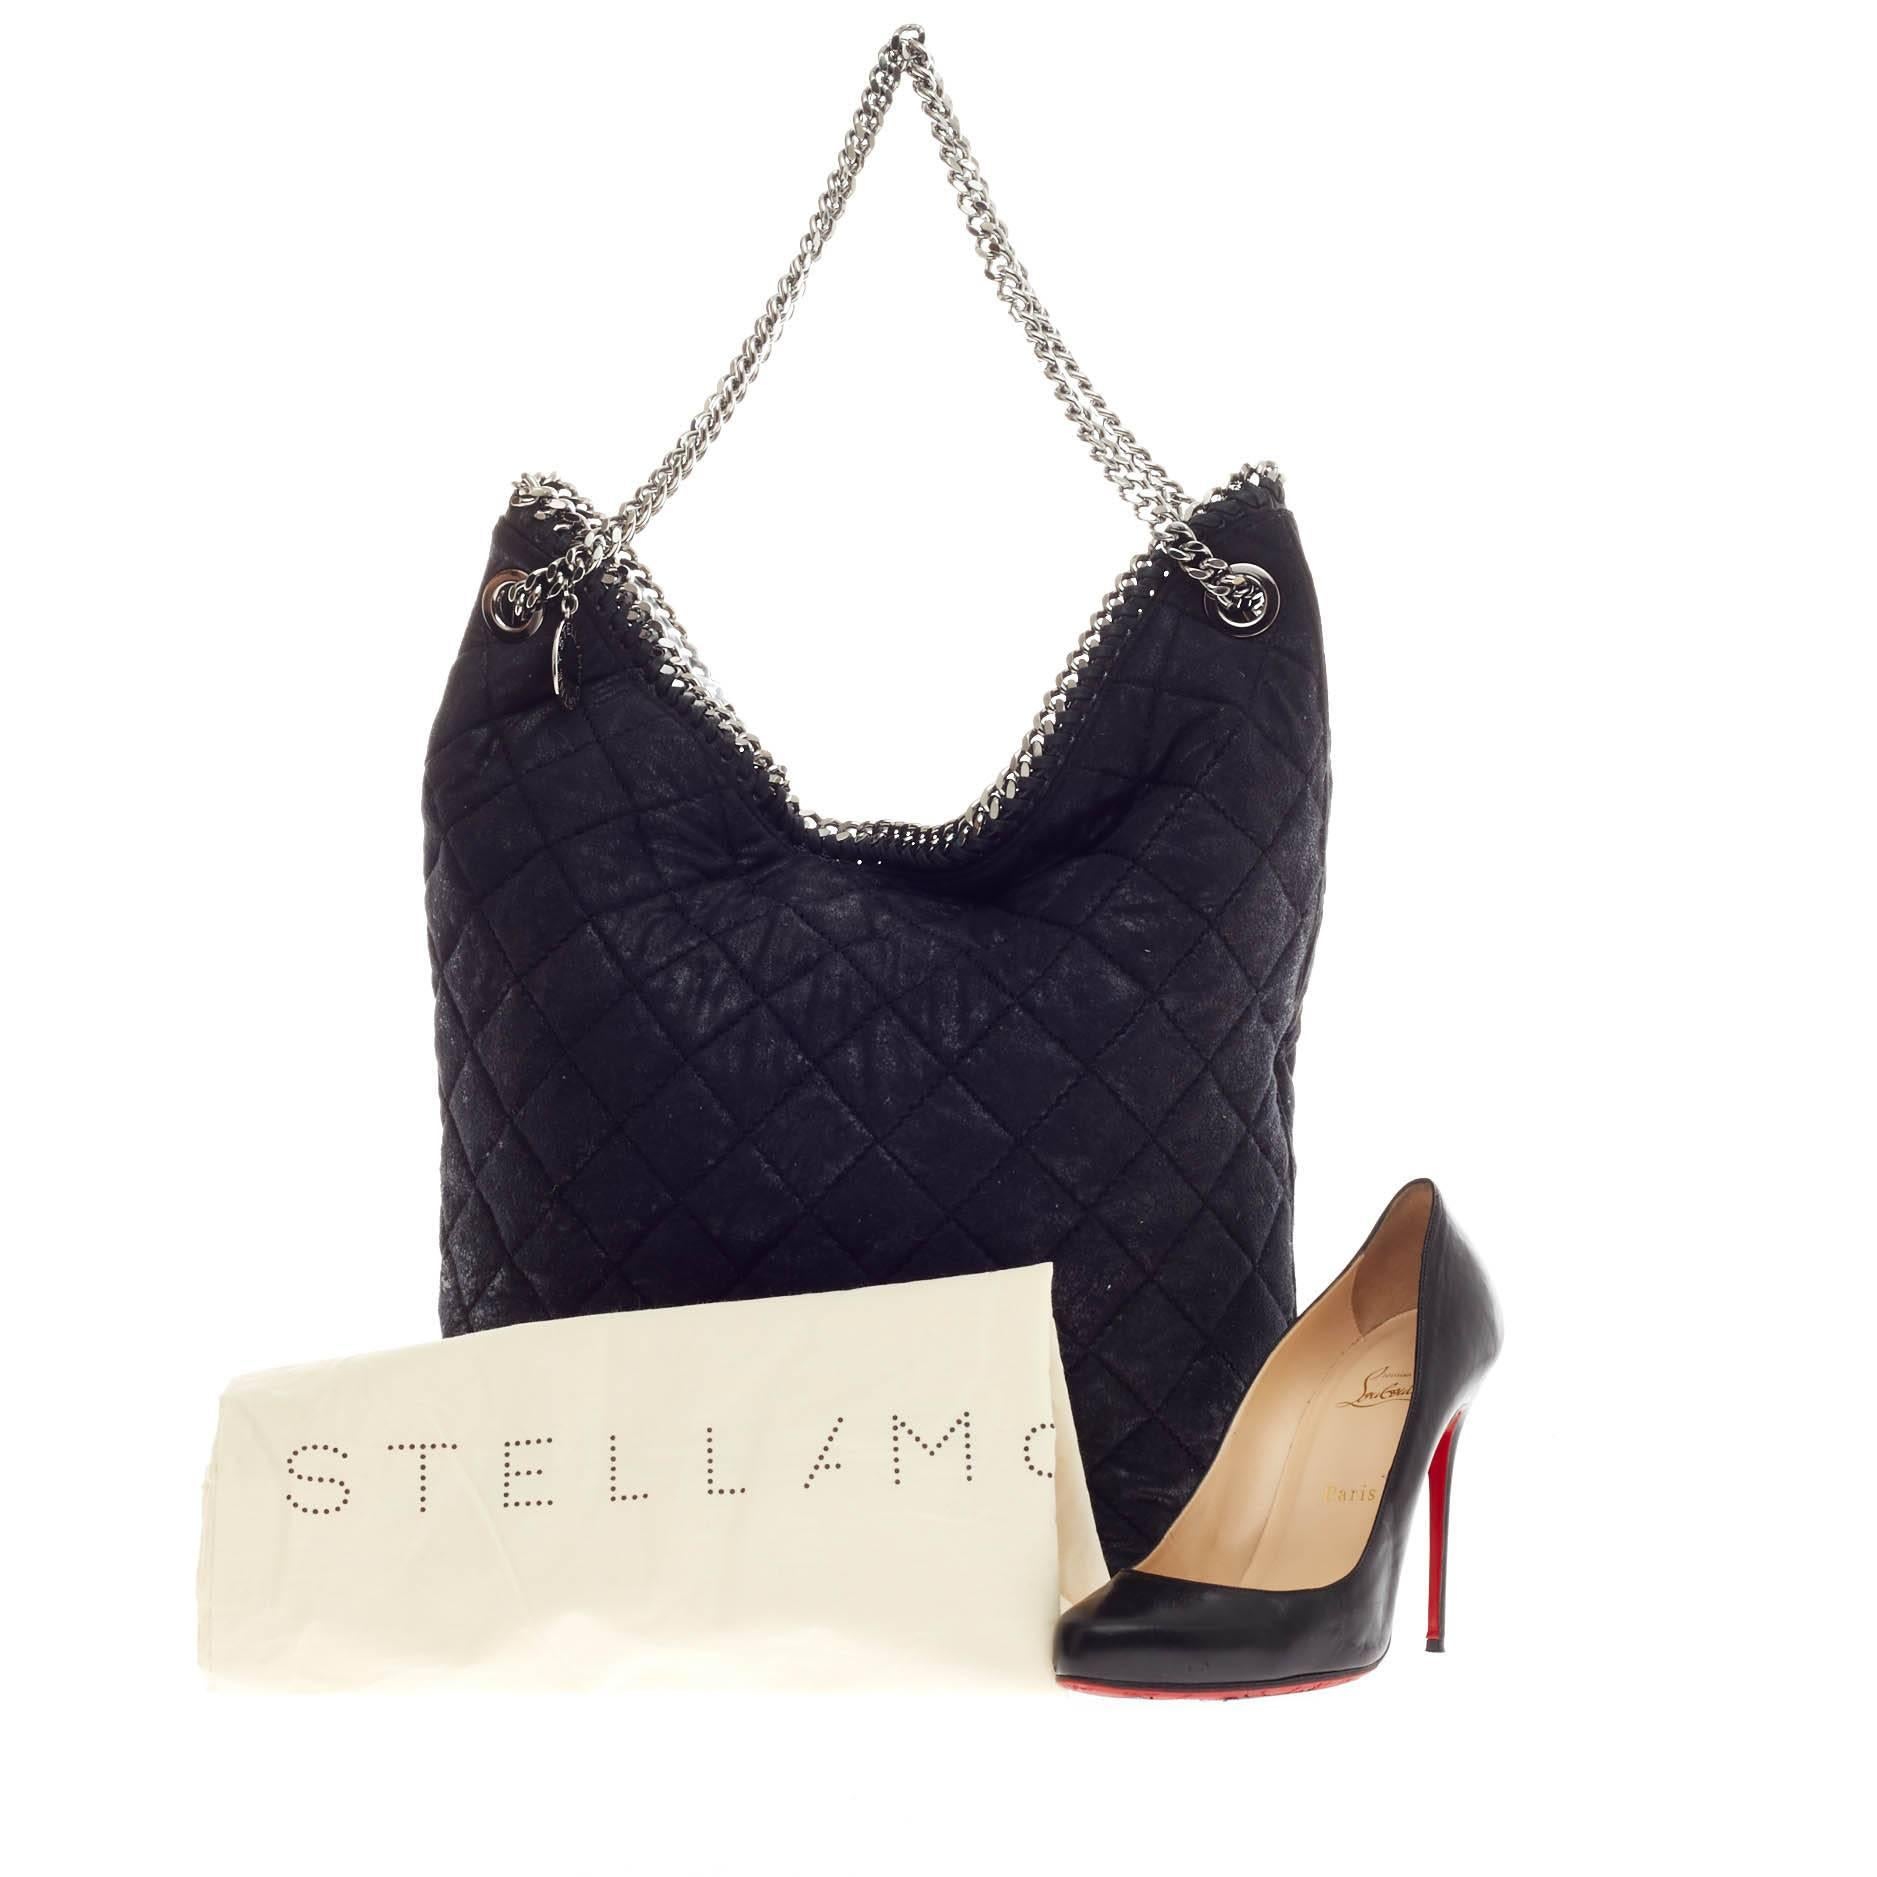 This authentic Stella McCartney Falabella Bucket Quilted Faux Leather is perfectly textured with shimmery black distressed and quilted faux leather that is chic yet understated. This slouchy, no-fuss bucket bag features whipstitched edges, silver